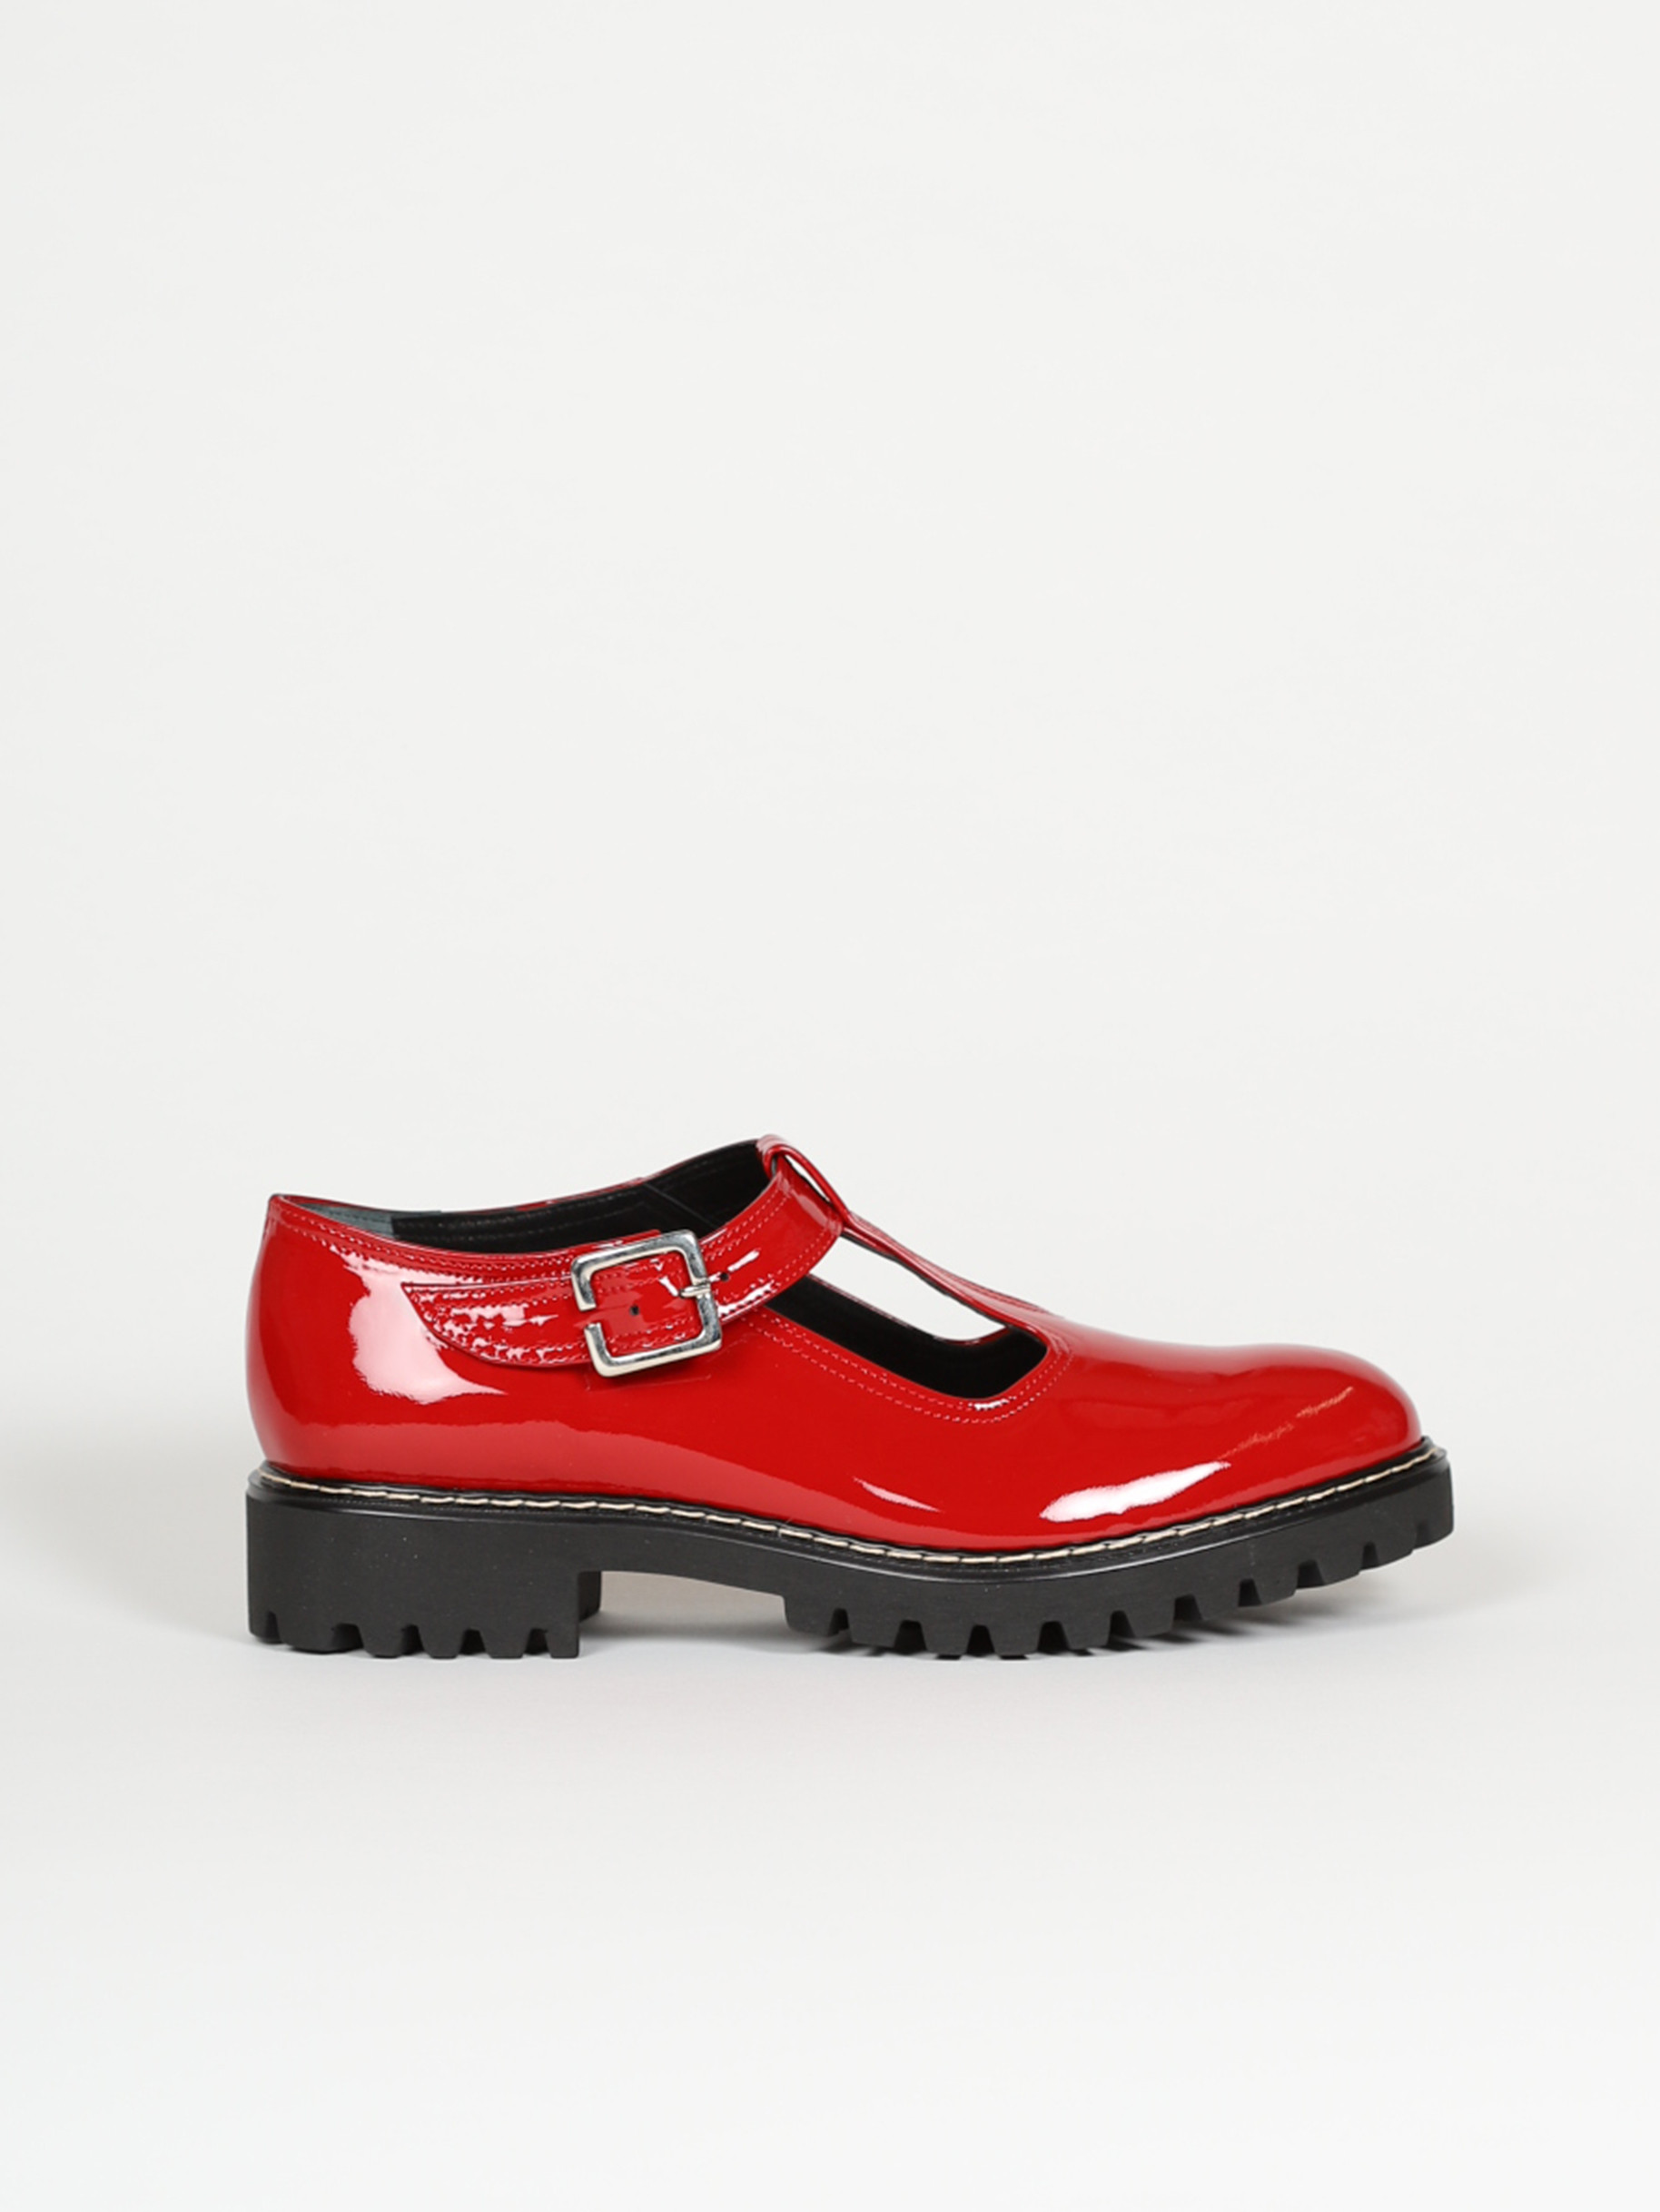 red patent leather mary jane shoes